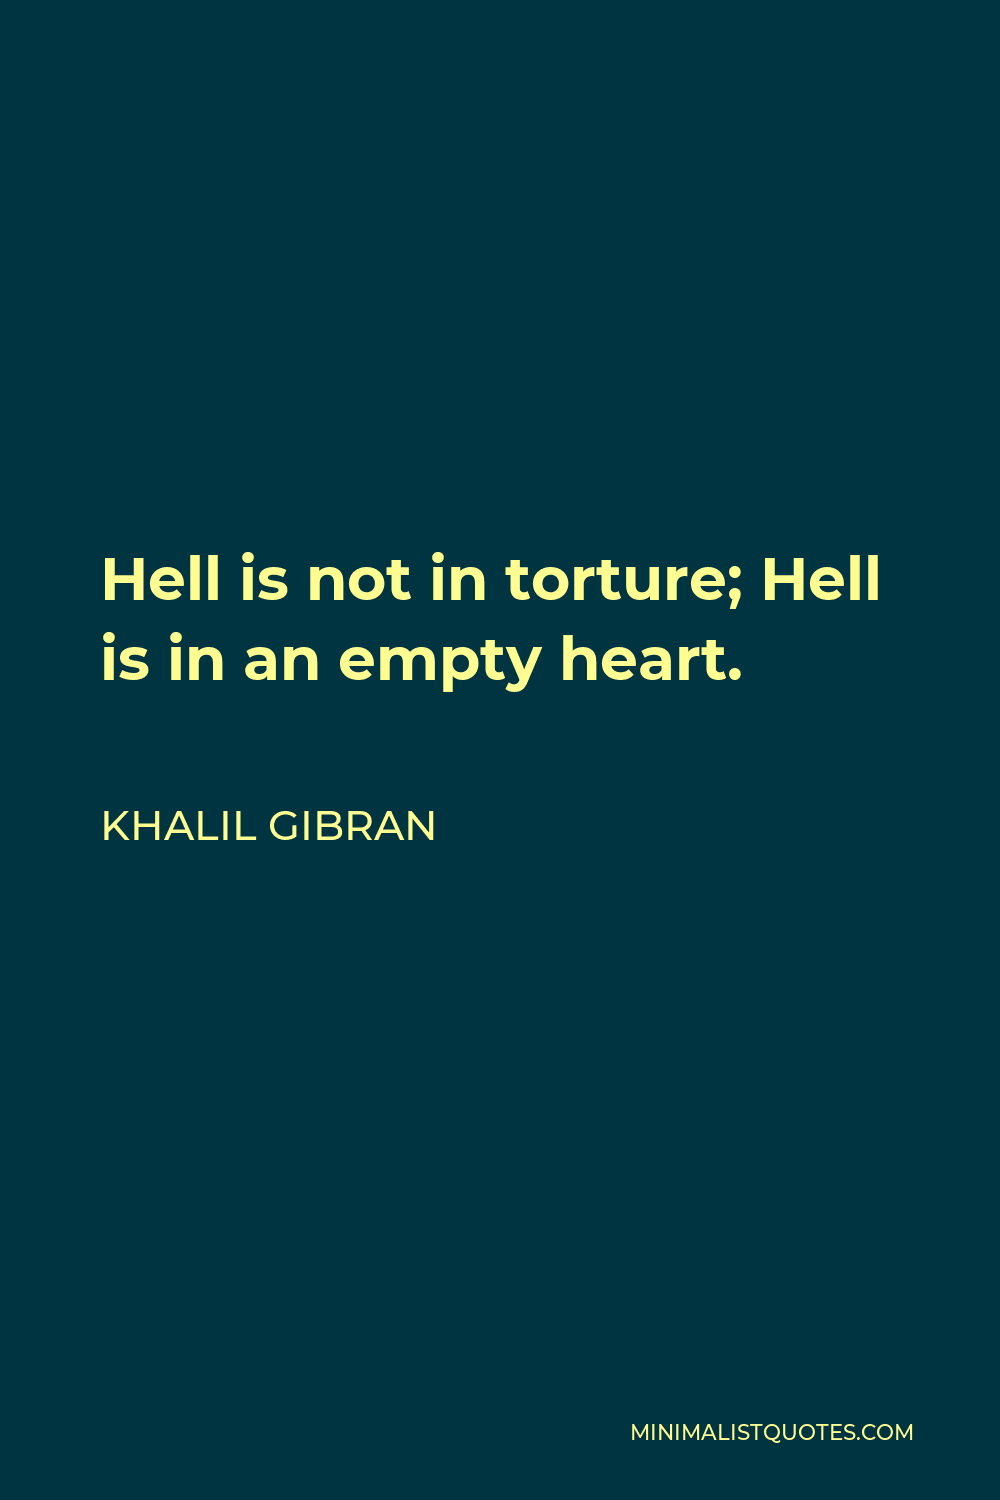 Khalil Gibran Quote - Hell is not in torture; Hell is in an empty heart.